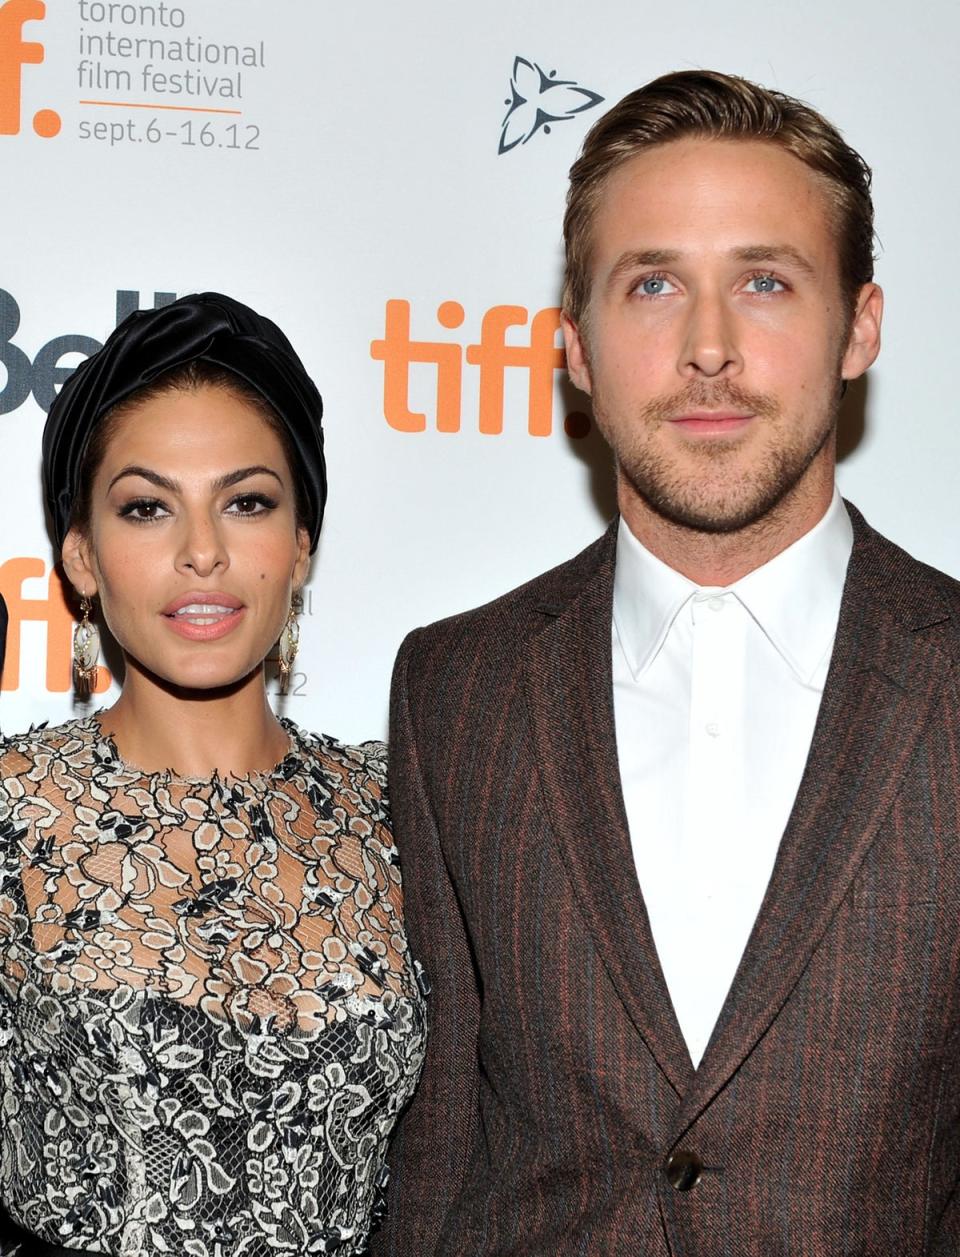 Ryan Gosling and Eva Mendes keep their family and relationship out of the public eye (Getty Images)